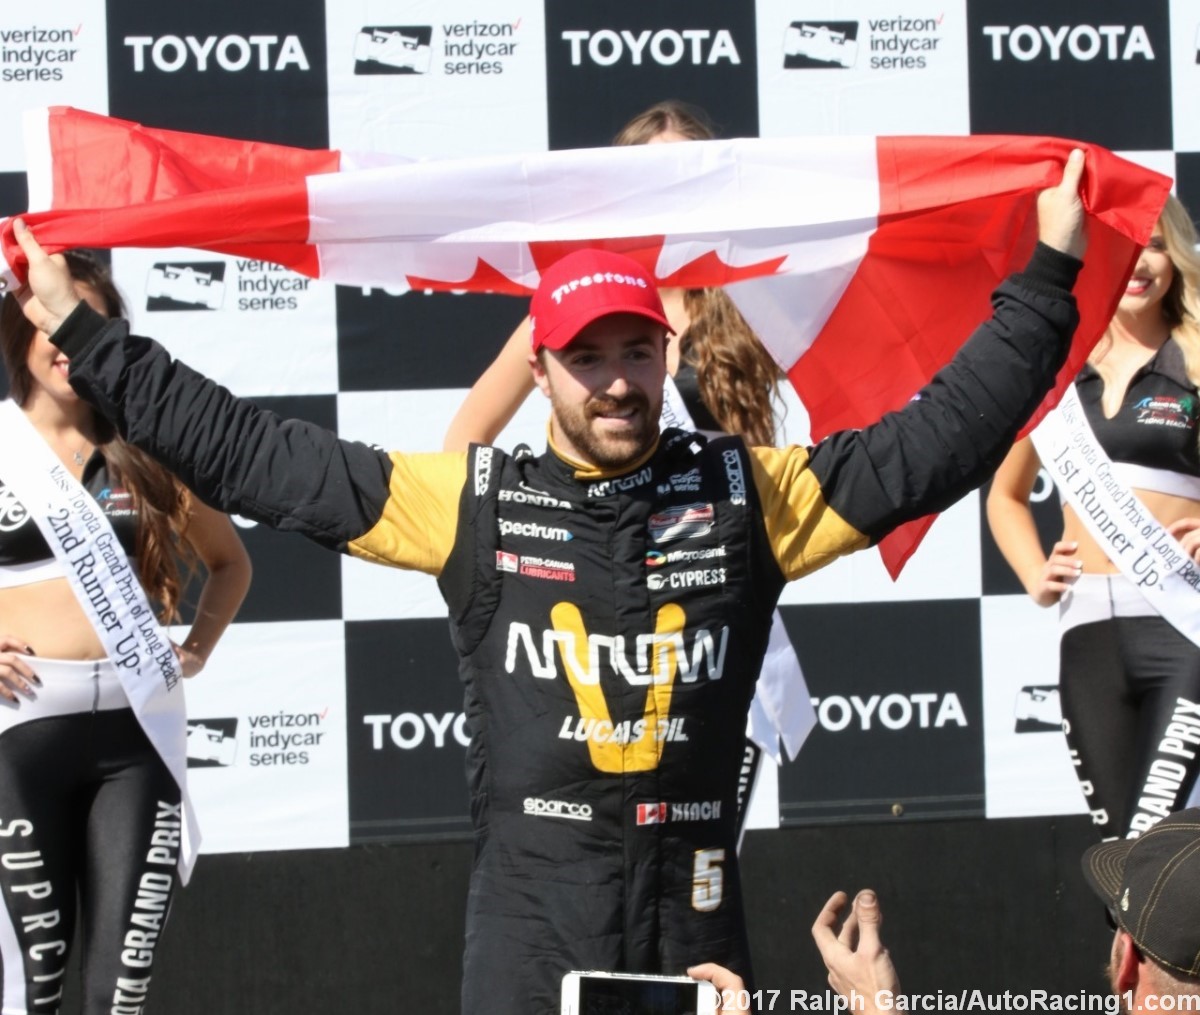 Hinchcliffe is the defending race champion